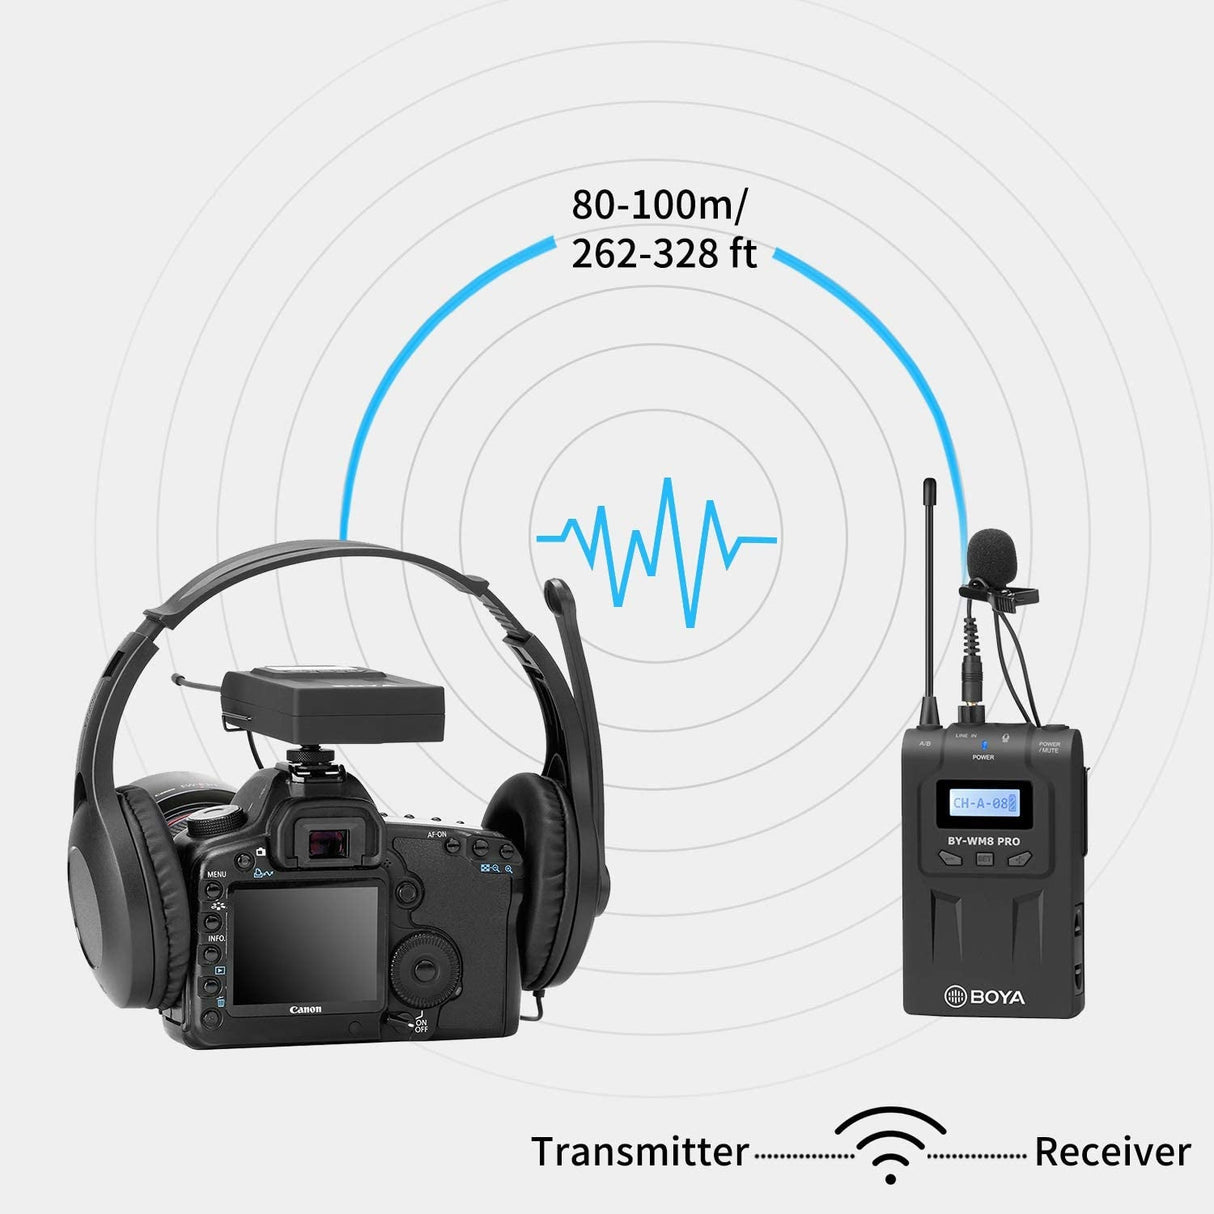 BOYA RX8 Pro UHF Dual-Channel Wireless Bodypack Receiver for TX8 Pro, BY-WHM8 Pro and BY-WXLR8 Pro Transmitter